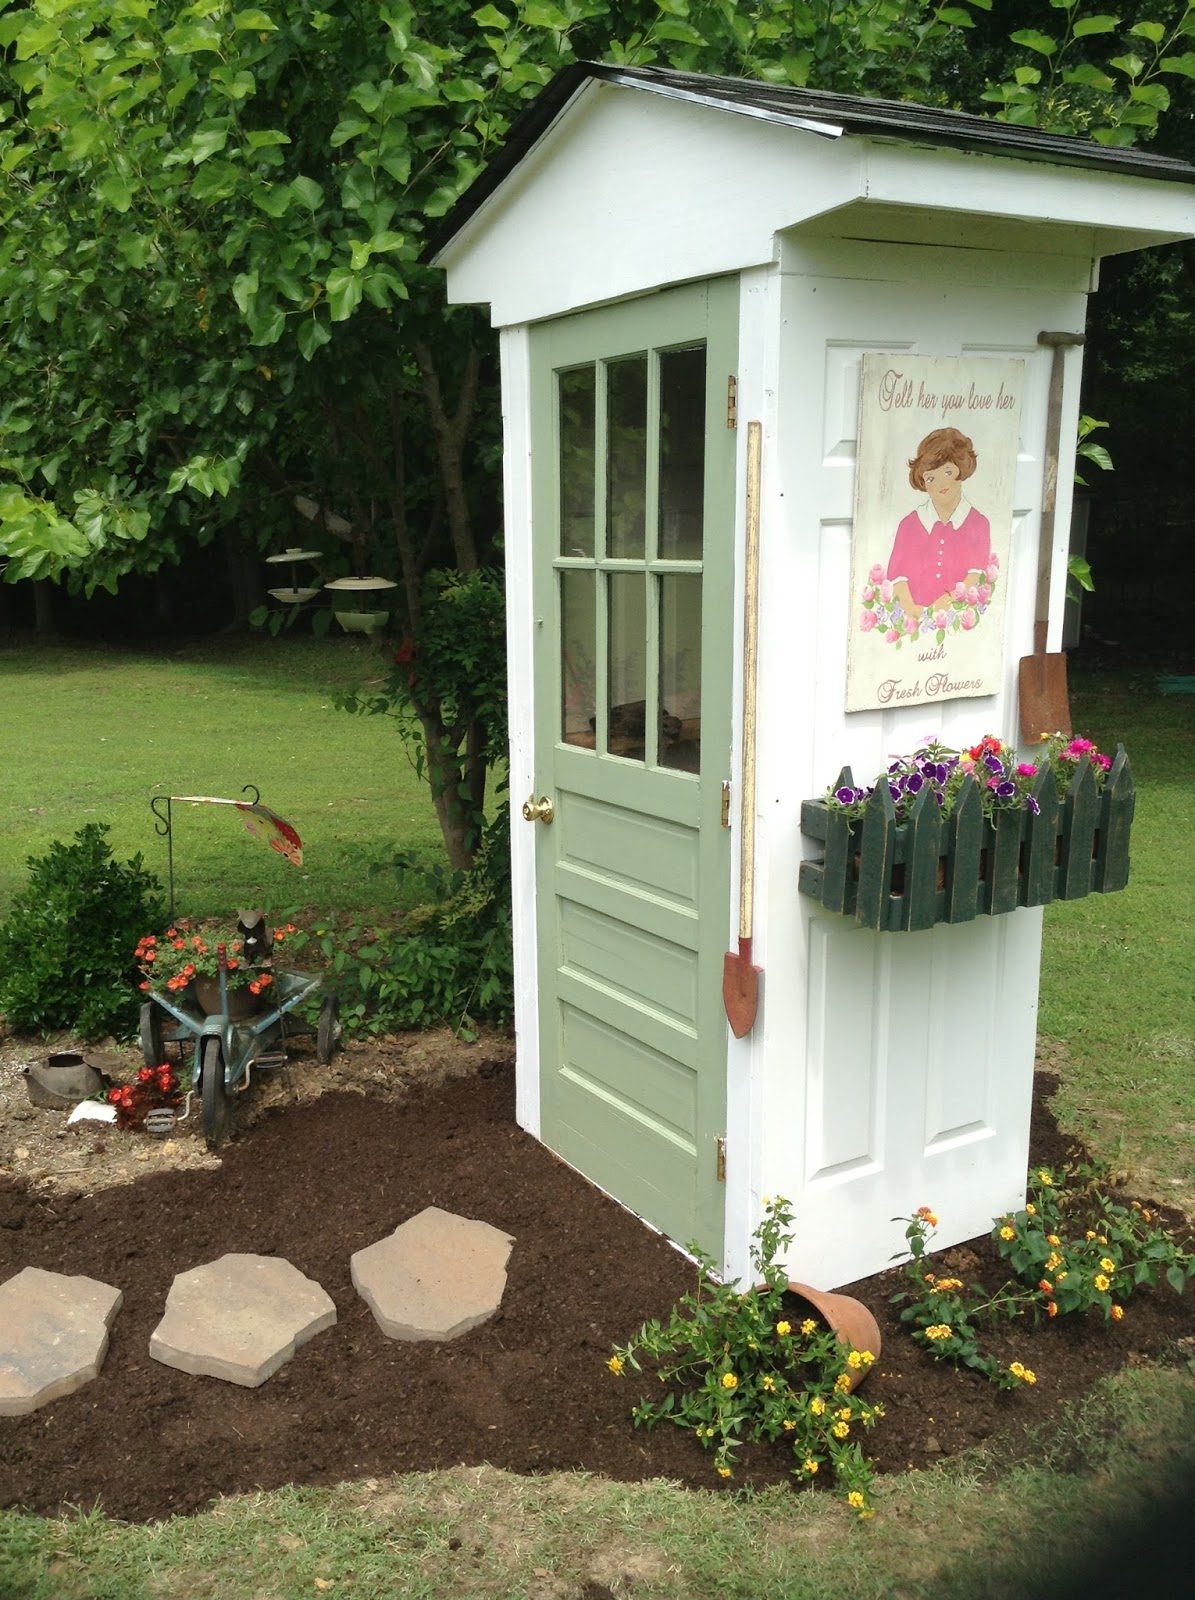 A Great Garden Shed Out Of Old Doors - Home DIY Fixes